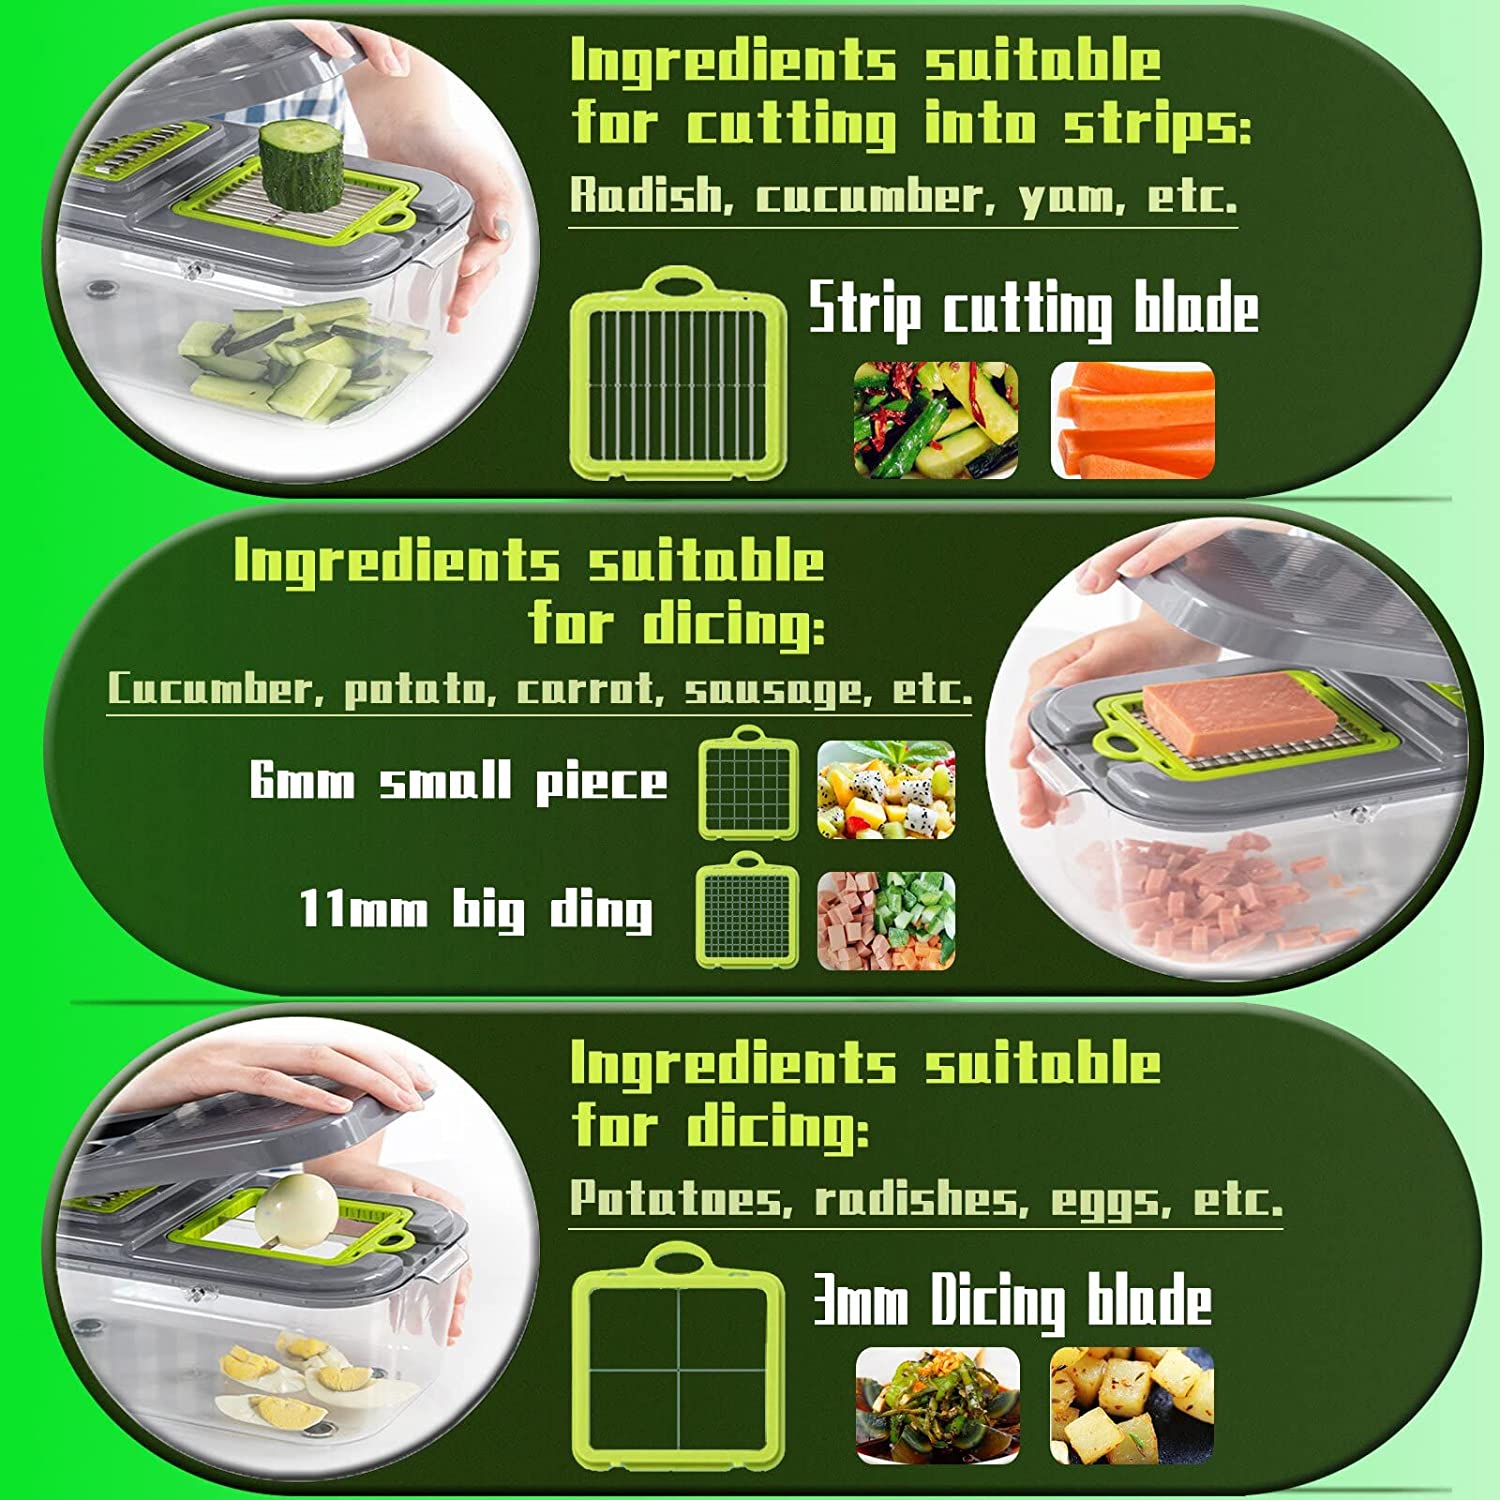 Vegetable Chopper, Onion Chopper, Mandolin Slicer, Pro 20 in Professional  Food Chopper Multifunctional Vegetable Chopper  Slicer, Dicer, Adjustable Vegetable  Chopper with Container